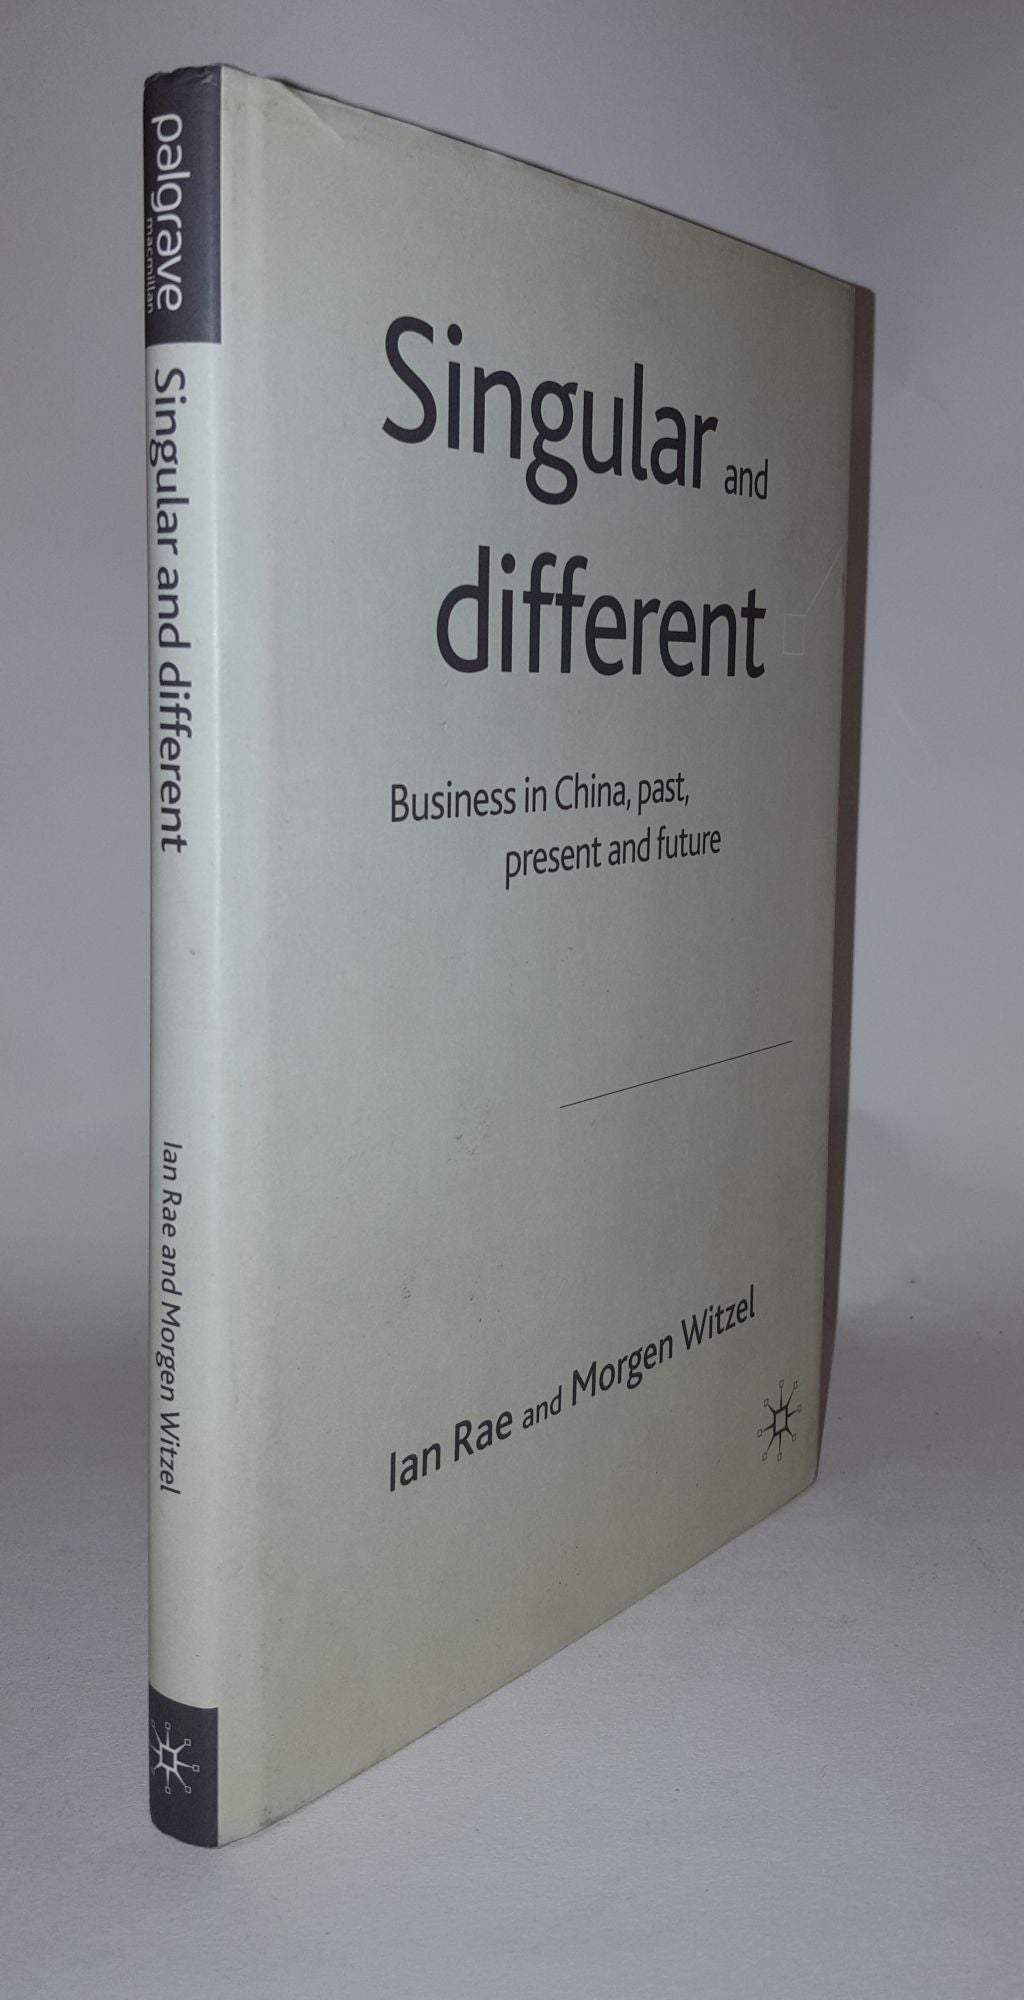 RAE Ian, WITZEL Morgen - Singular and Different Businesss in China Past Present and Future